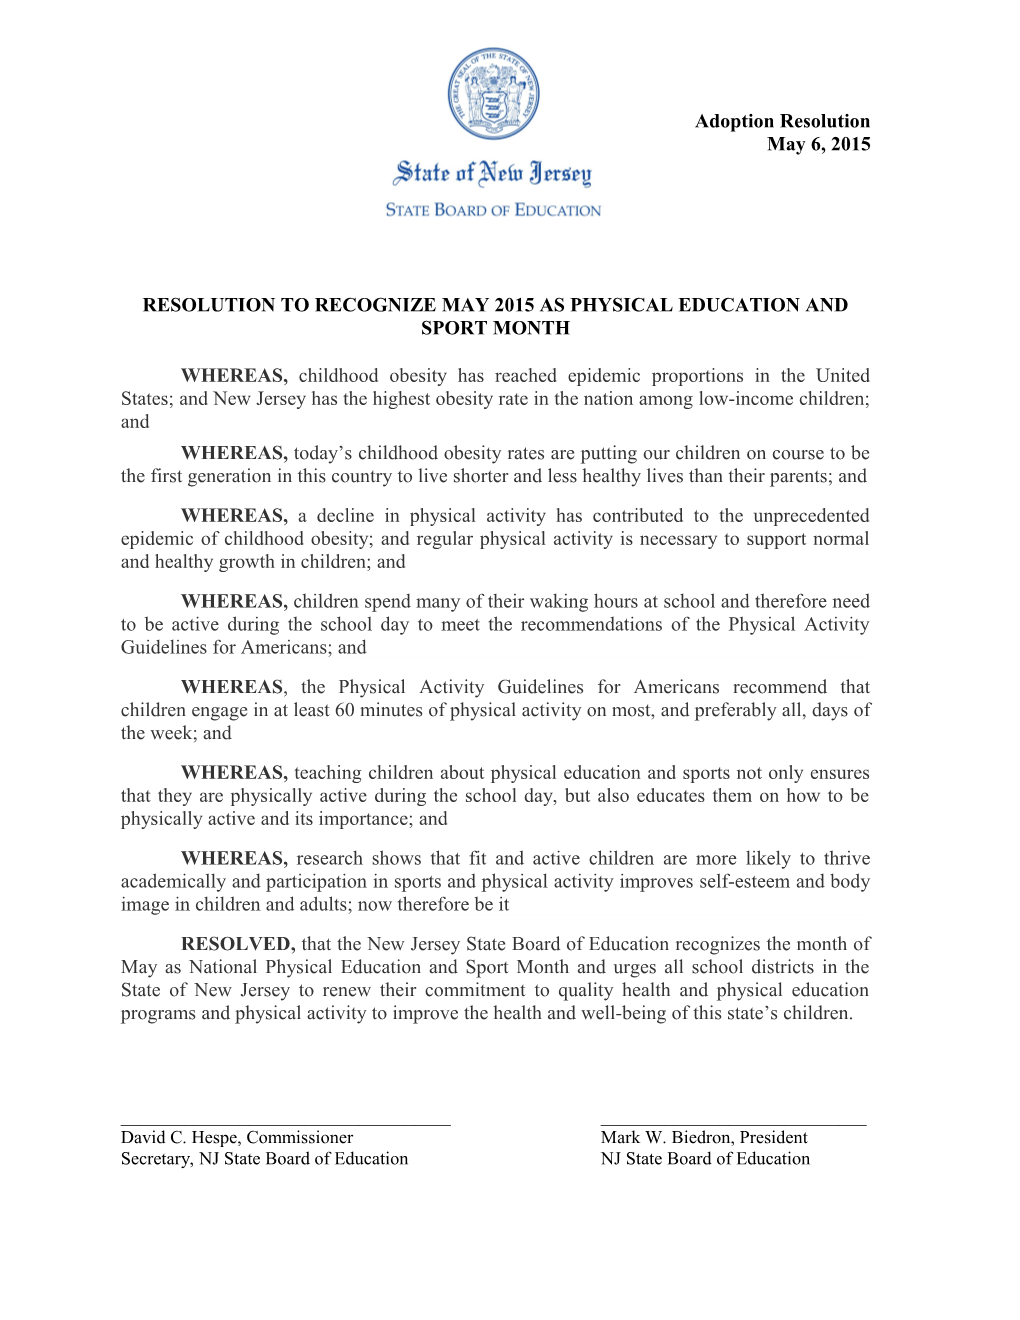 Resolution to Recognize May 2015 As Physical Education and Sport Month